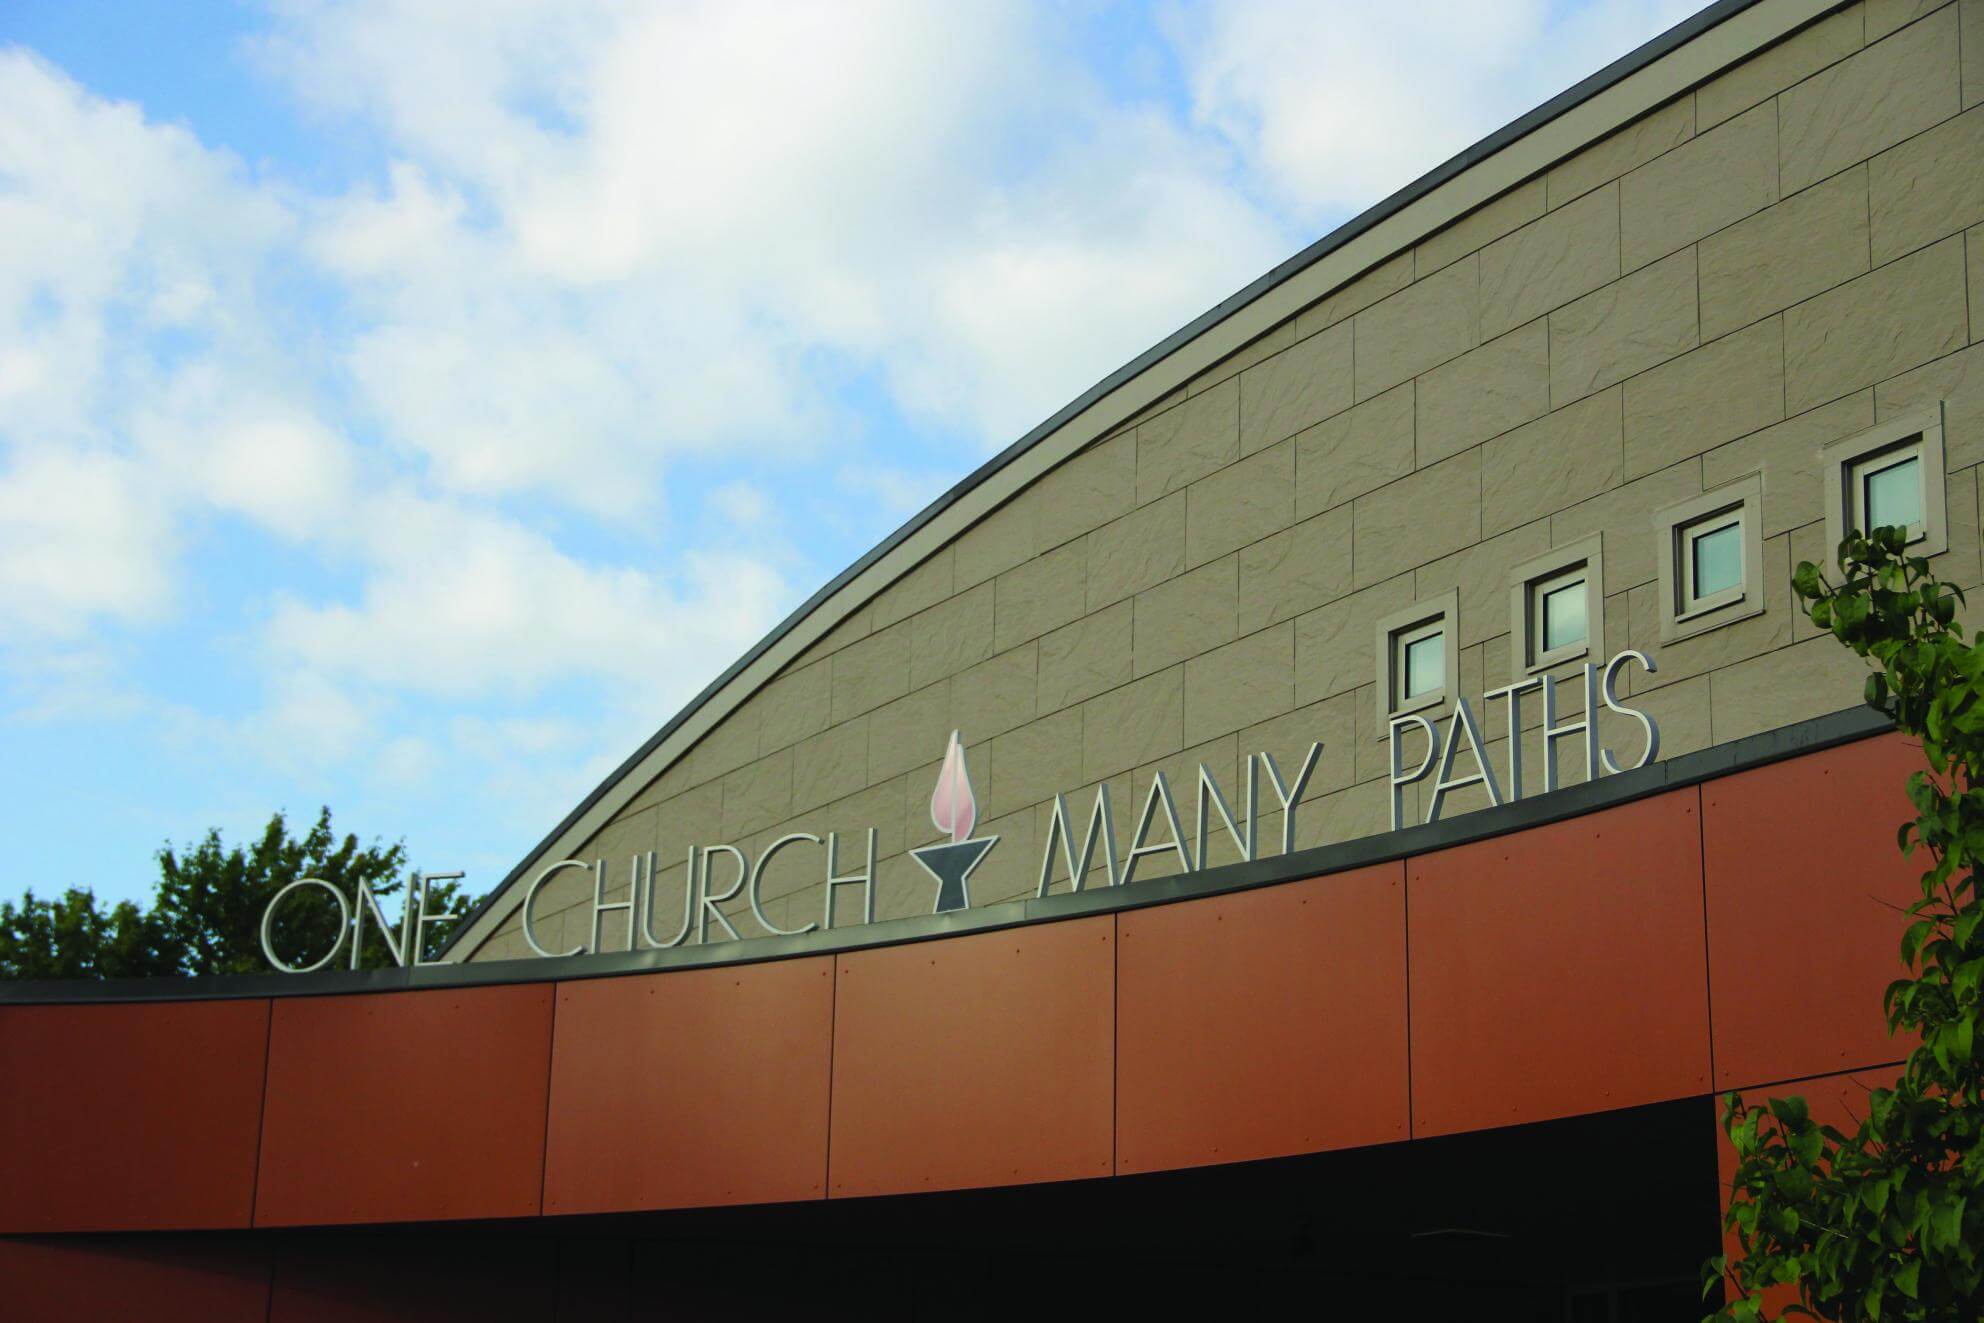 church building with sign, "One Church, Many Paths"